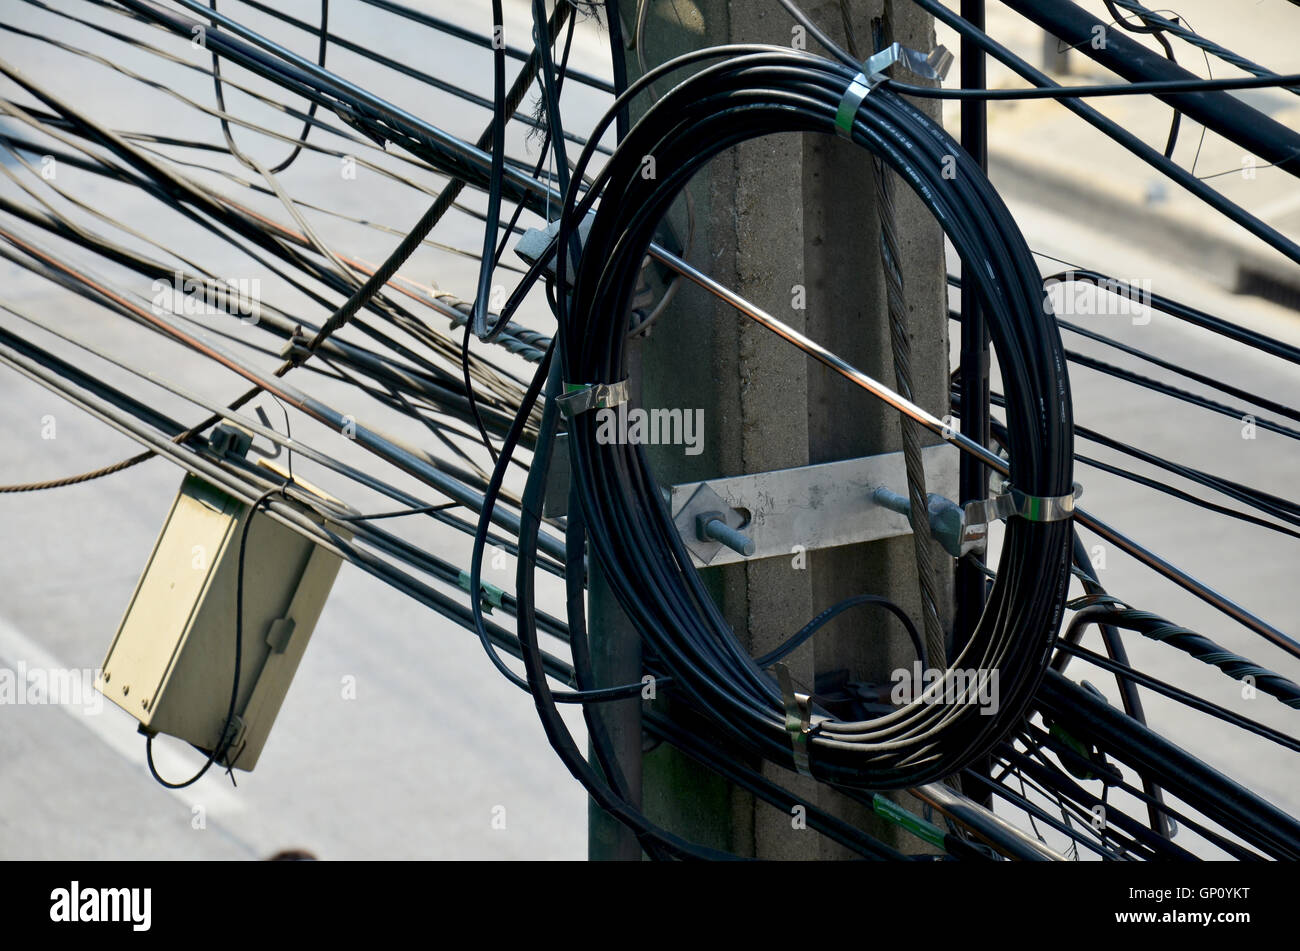 Many wires messy with power line cables, transformers and phone lines on electricity pillar or Utility pole at beside road on Ap Stock Photo